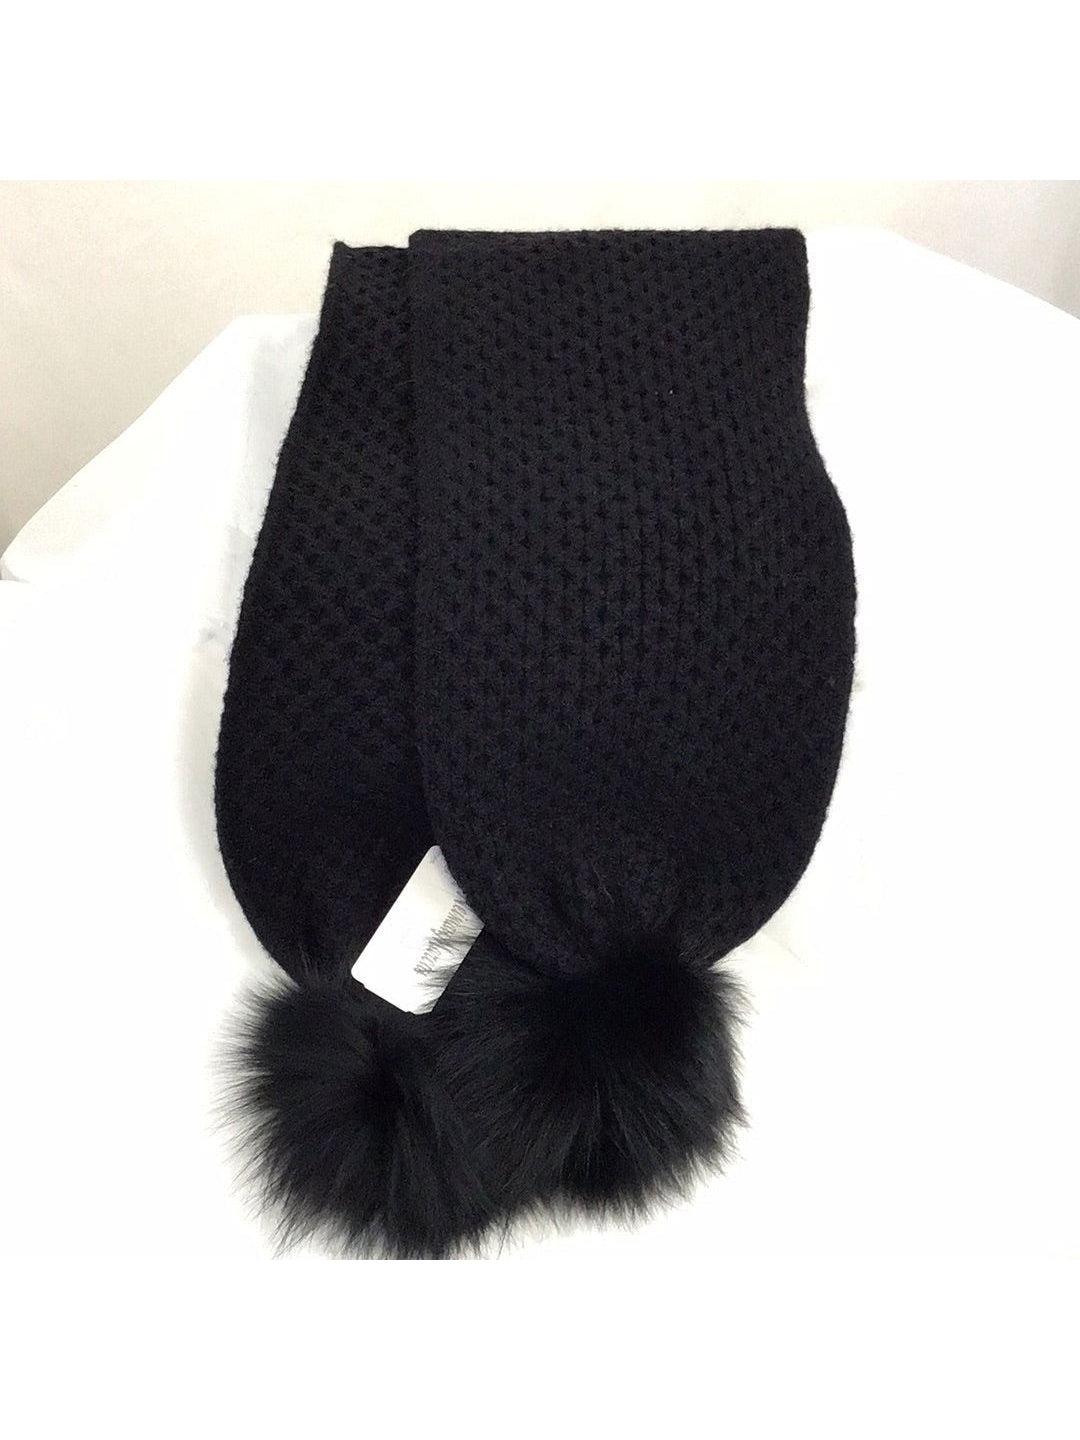 Neiman Marcus Black Scarf w/Fur Pom Poms - NWT - The Kennedy Collective Thrift - 